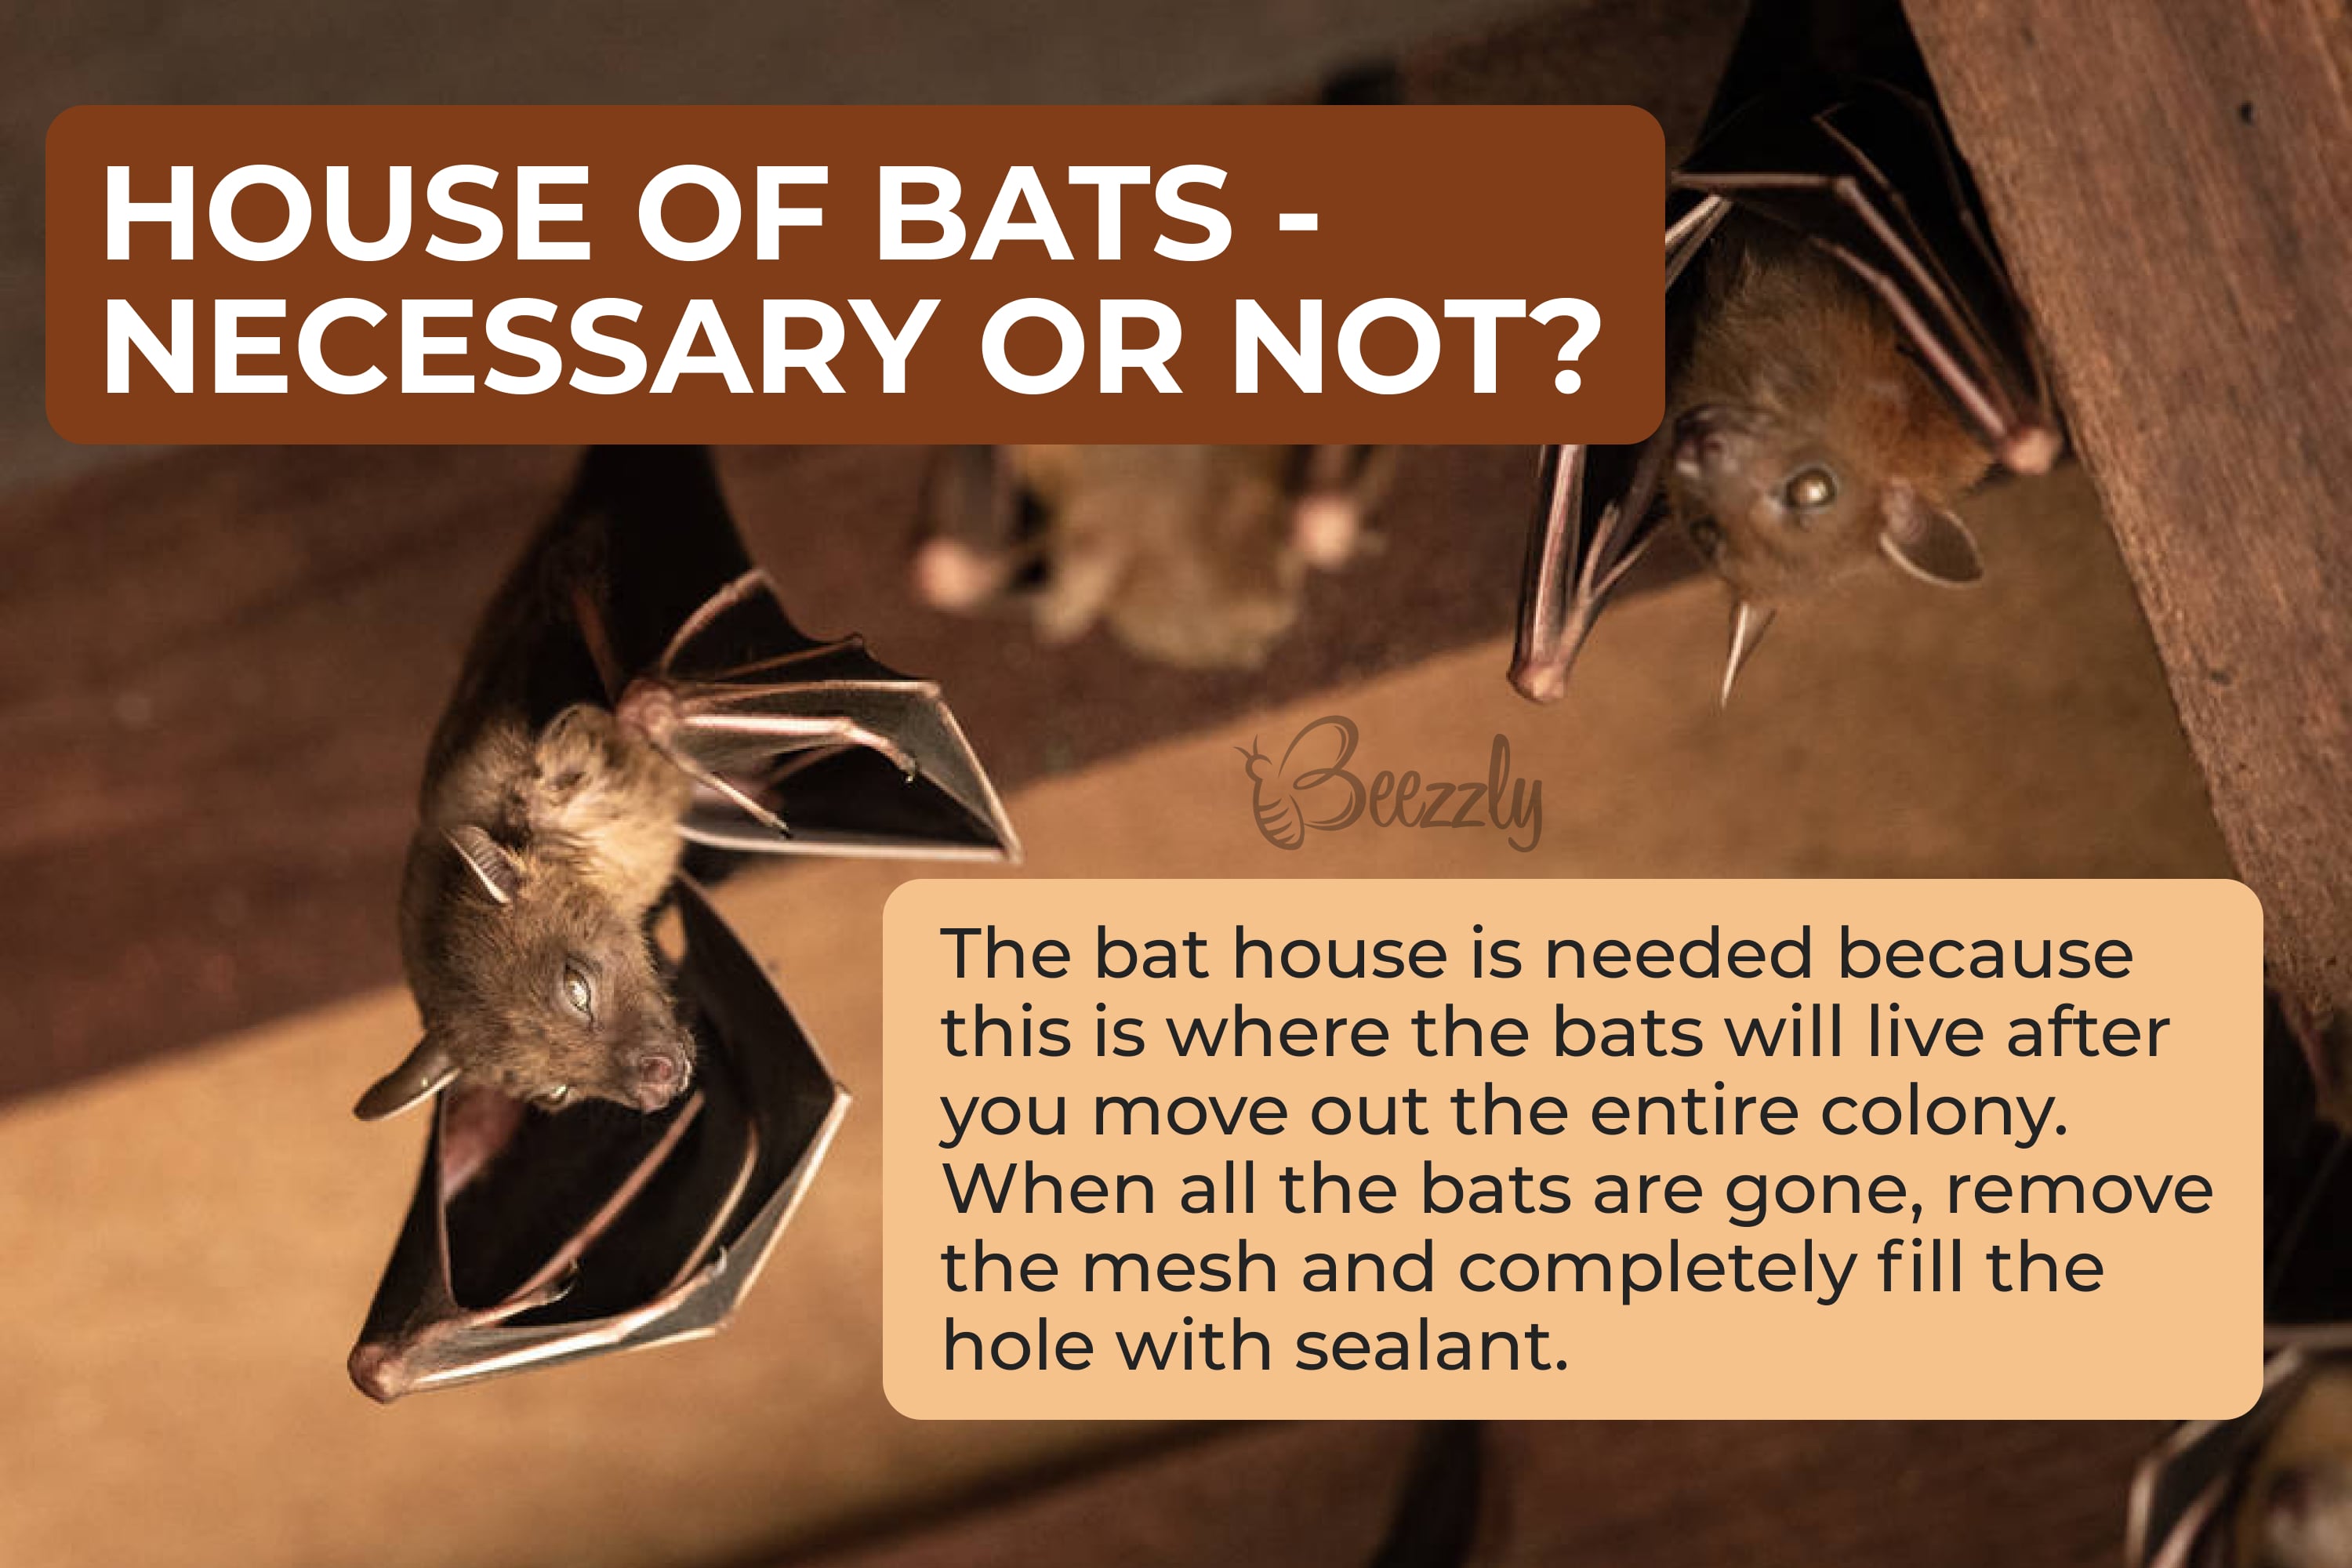 House of bats – necessary or not